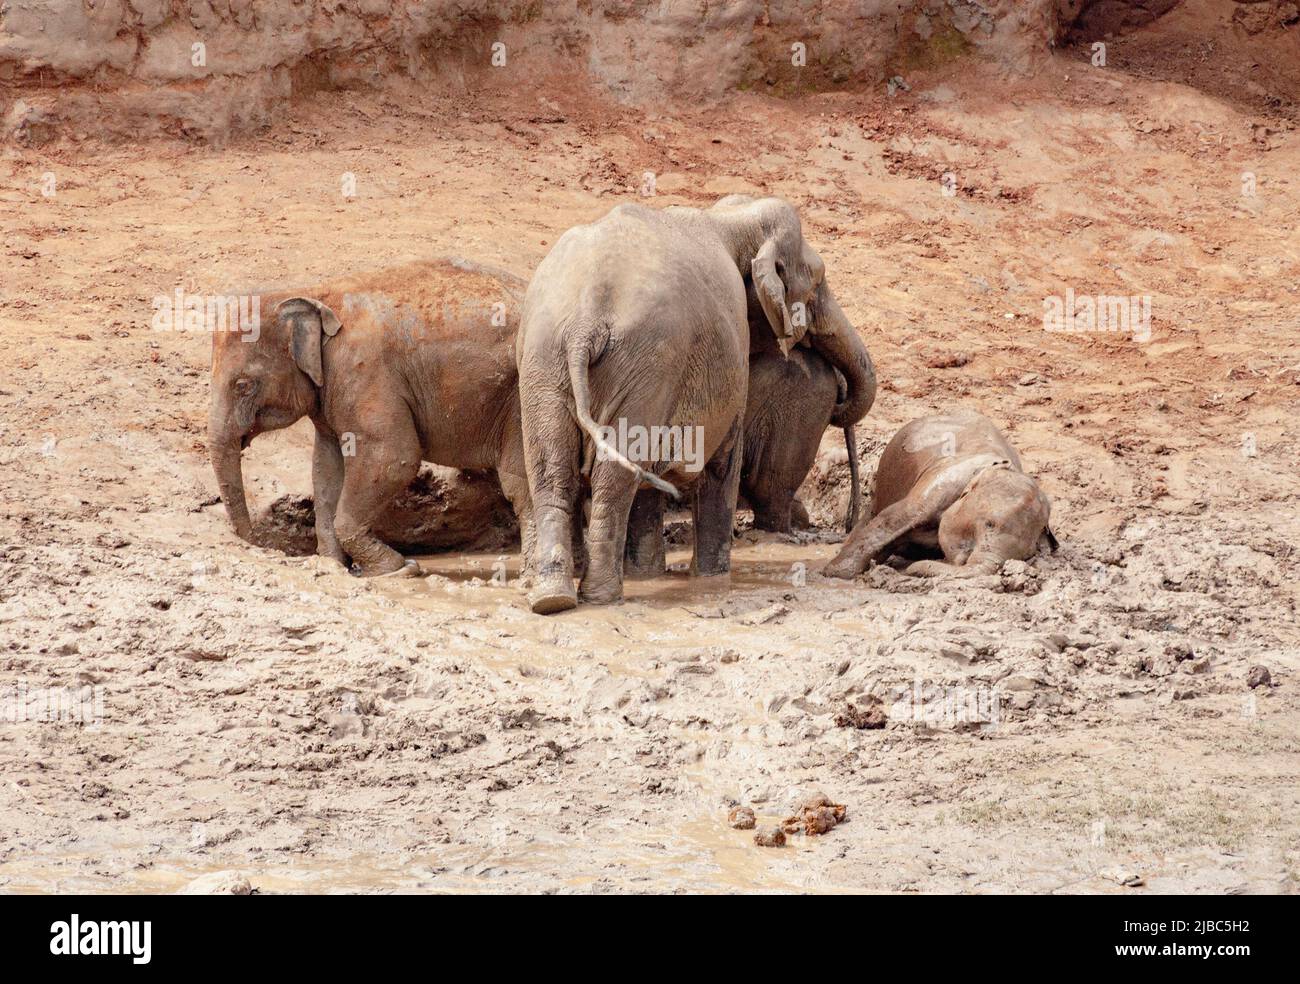 A group of Asian elephants including a calf are spotted bathing themselves in mud in Sri Lanka. Stock Photo